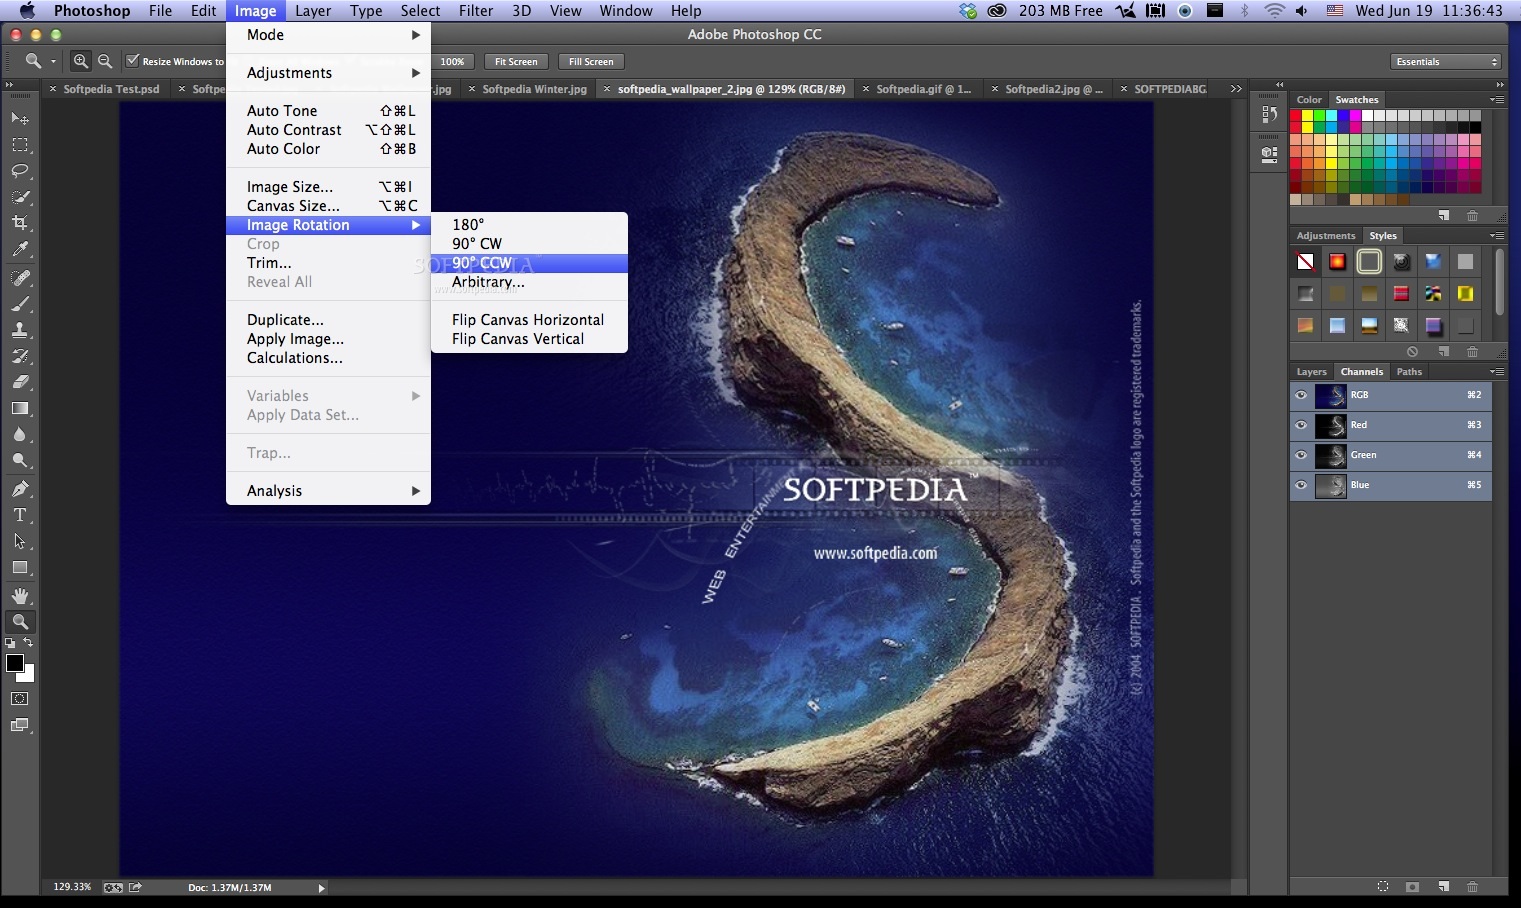 Adobe Photoshop Free Download For Mac Os X 10.5.8